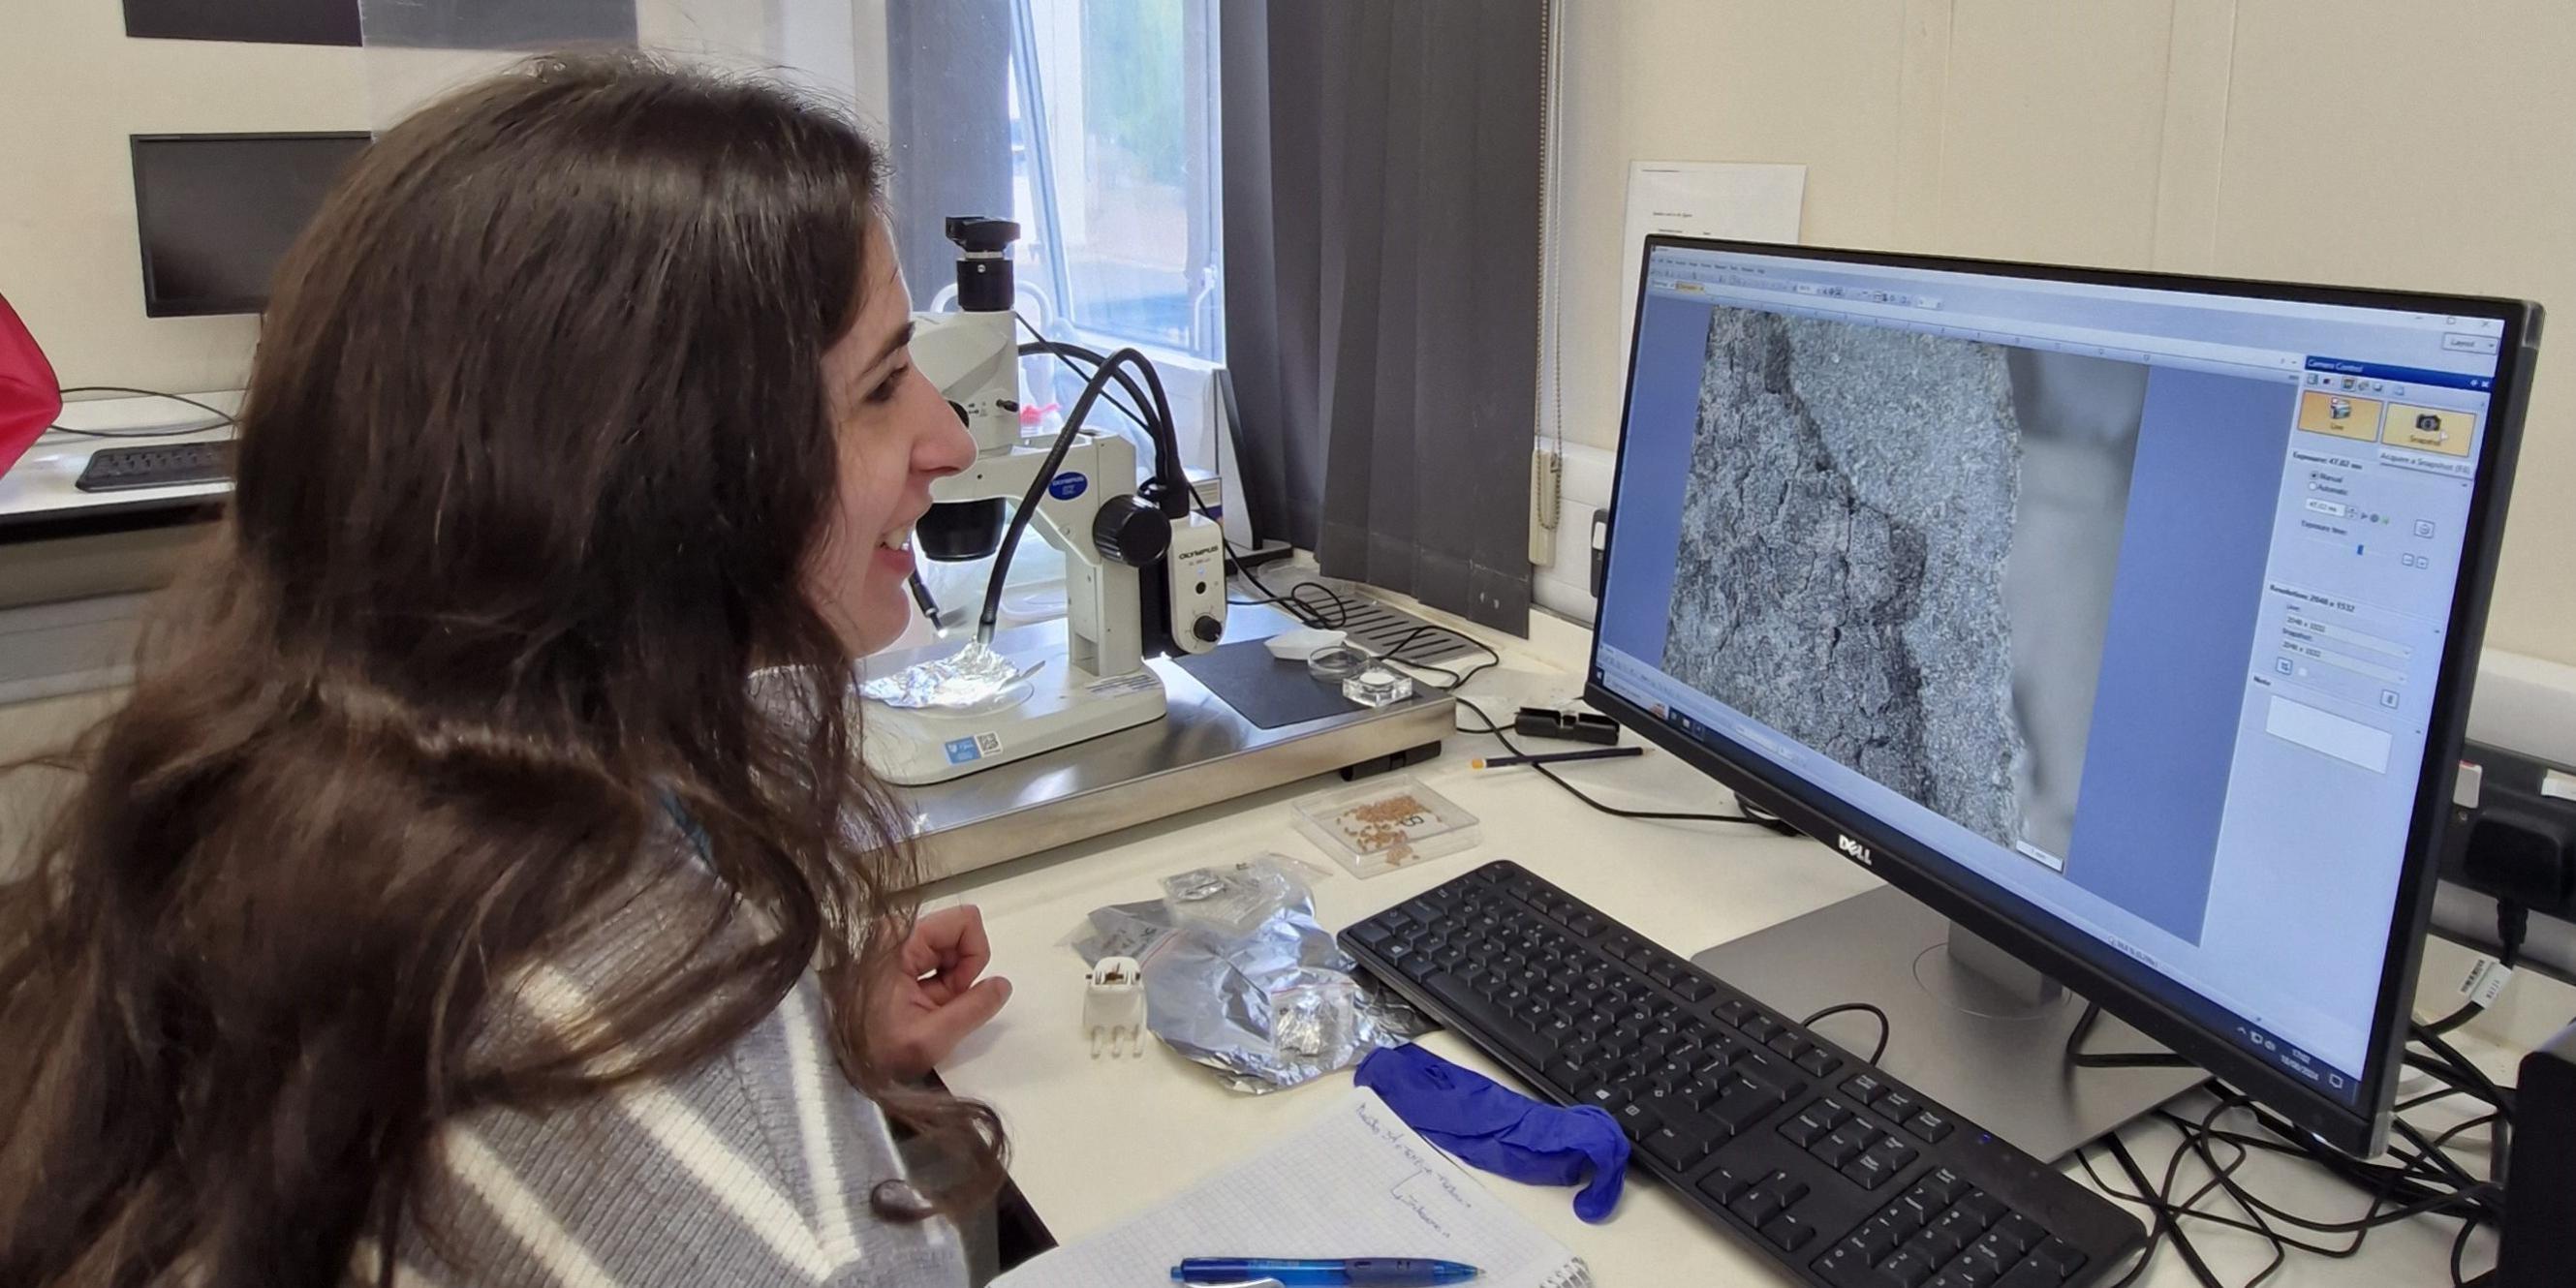 PhD student Daniela Saghessi training in the analysis of archaeological remains using microscopy